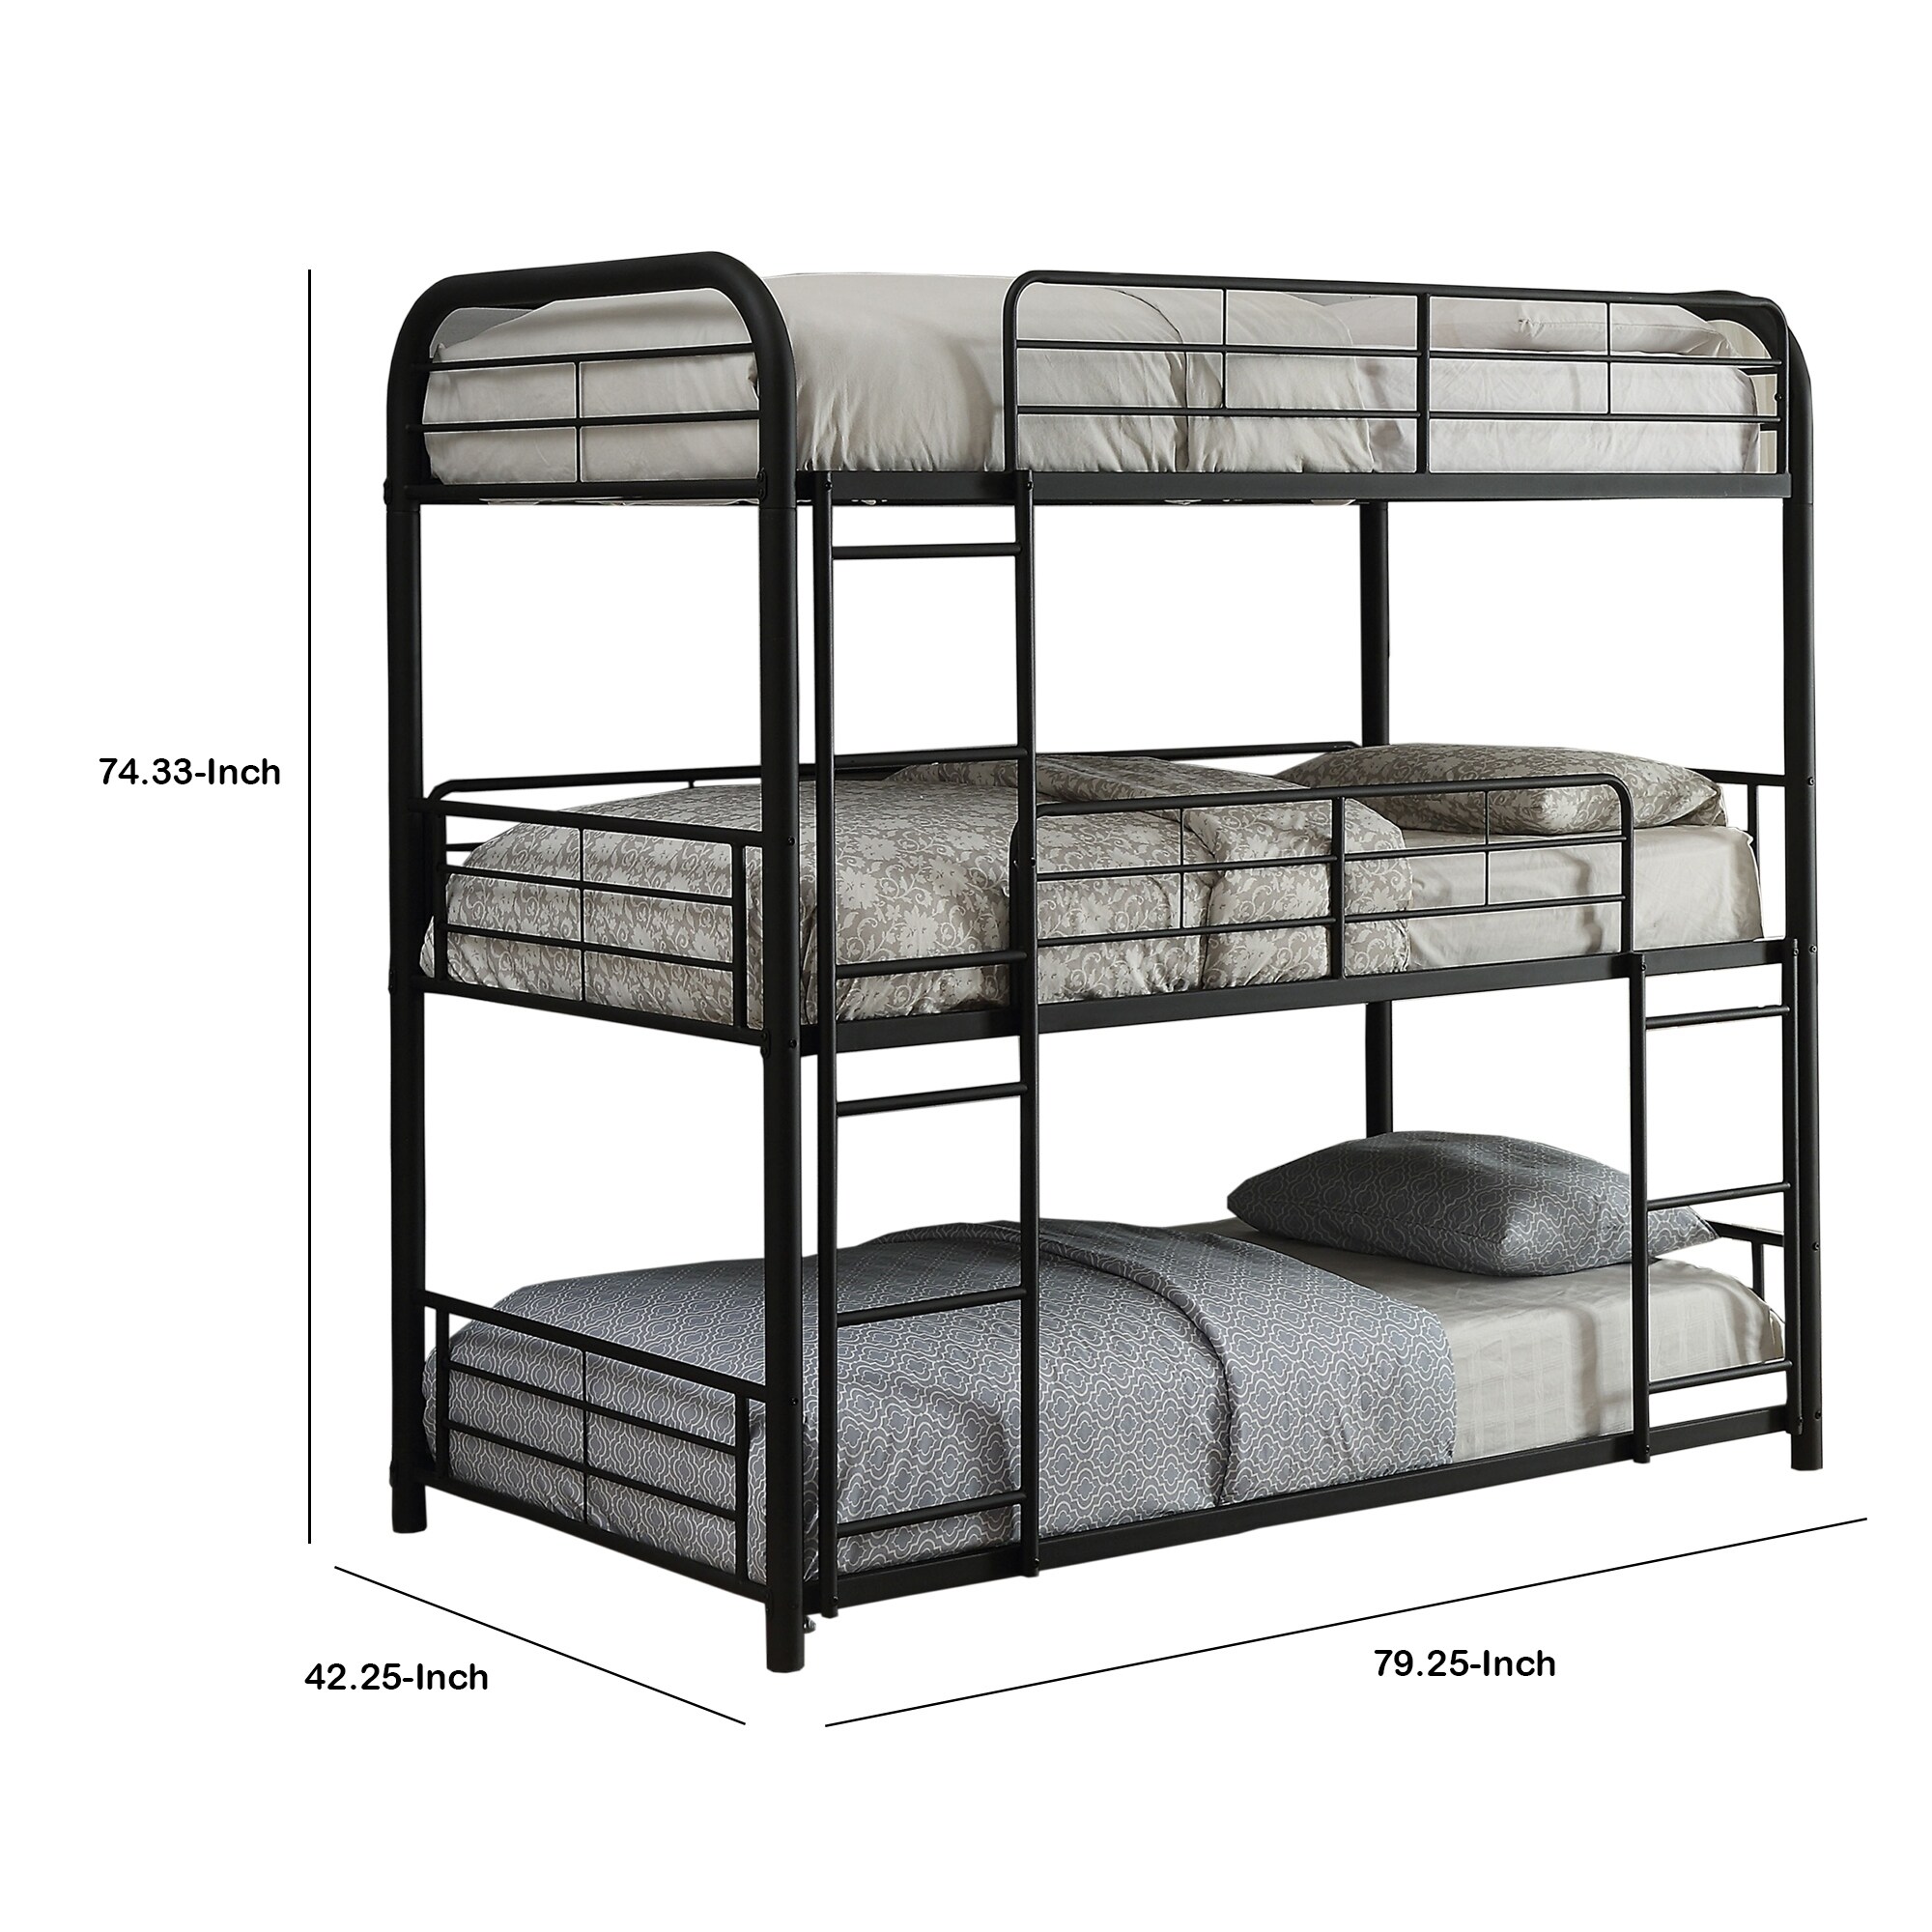 3 layer bunk beds for sale